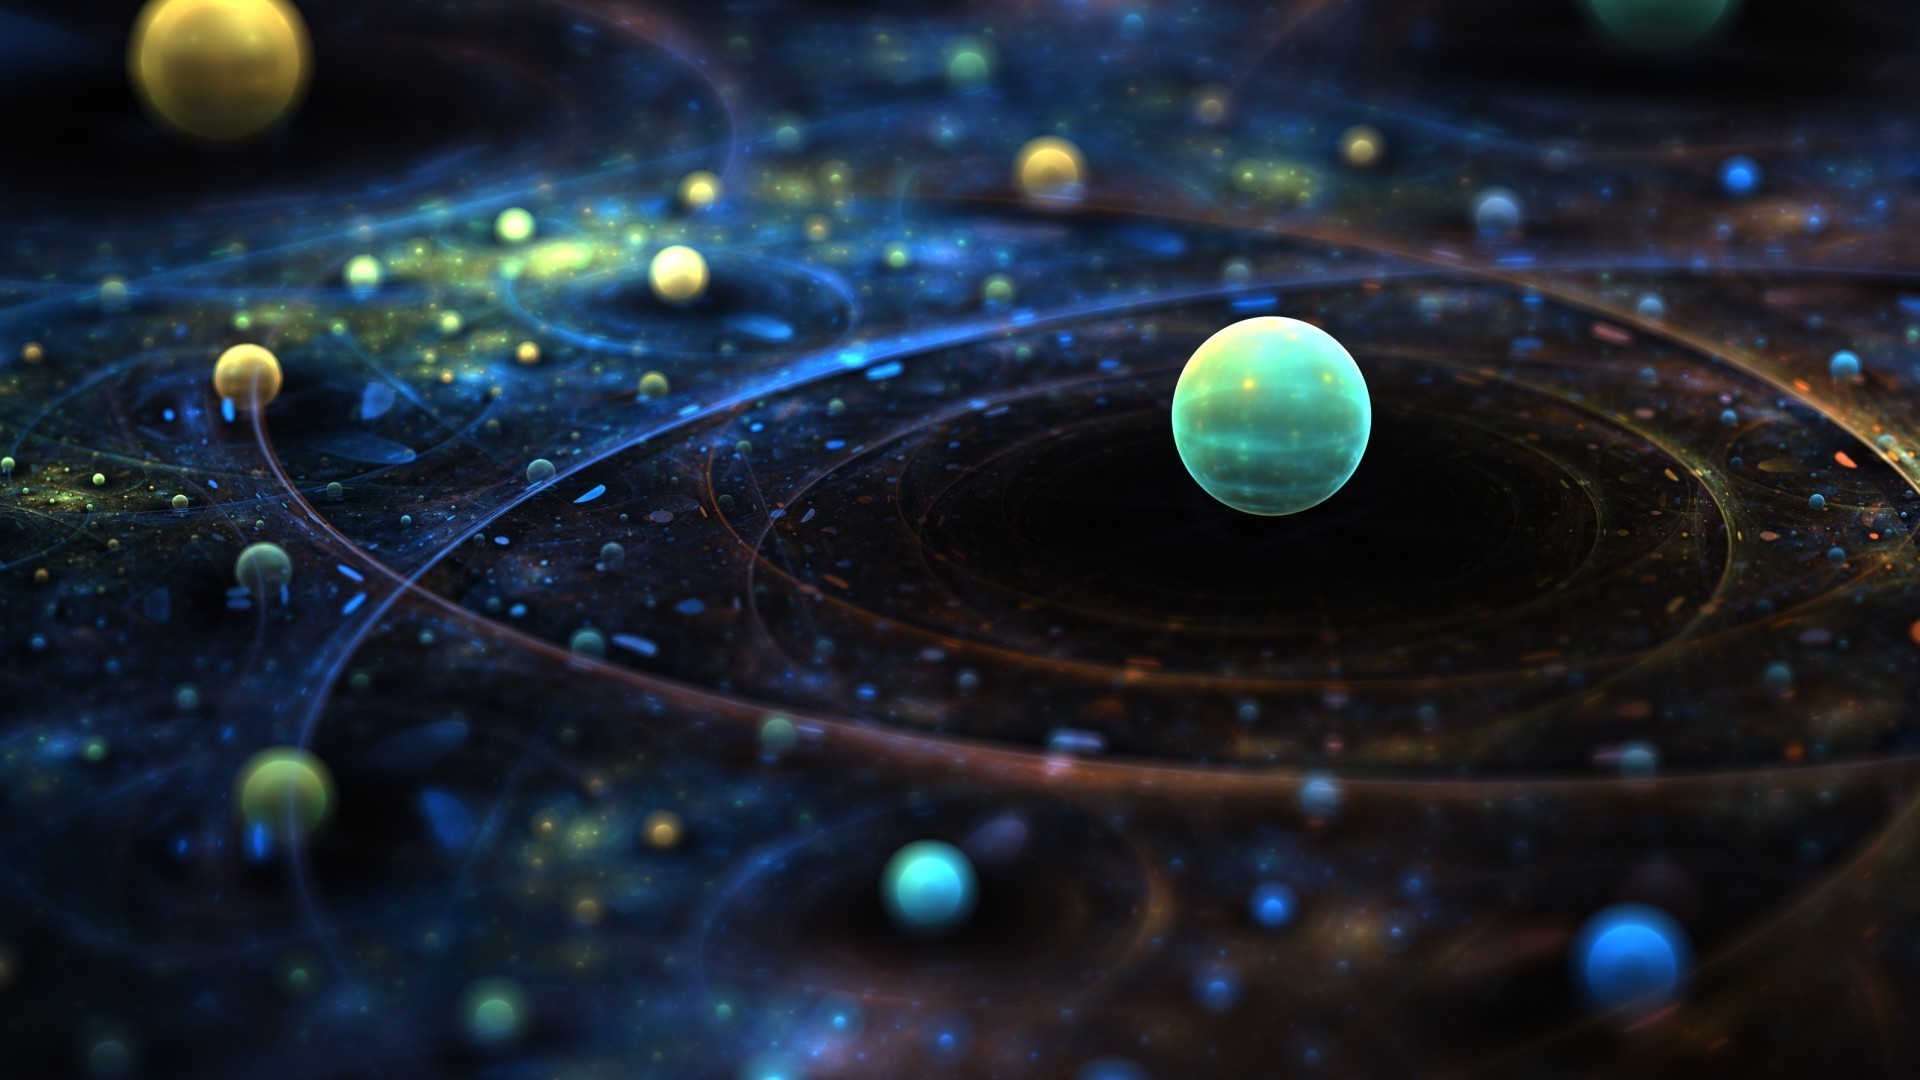 Colorful Solar System Digital Art Wallpapers